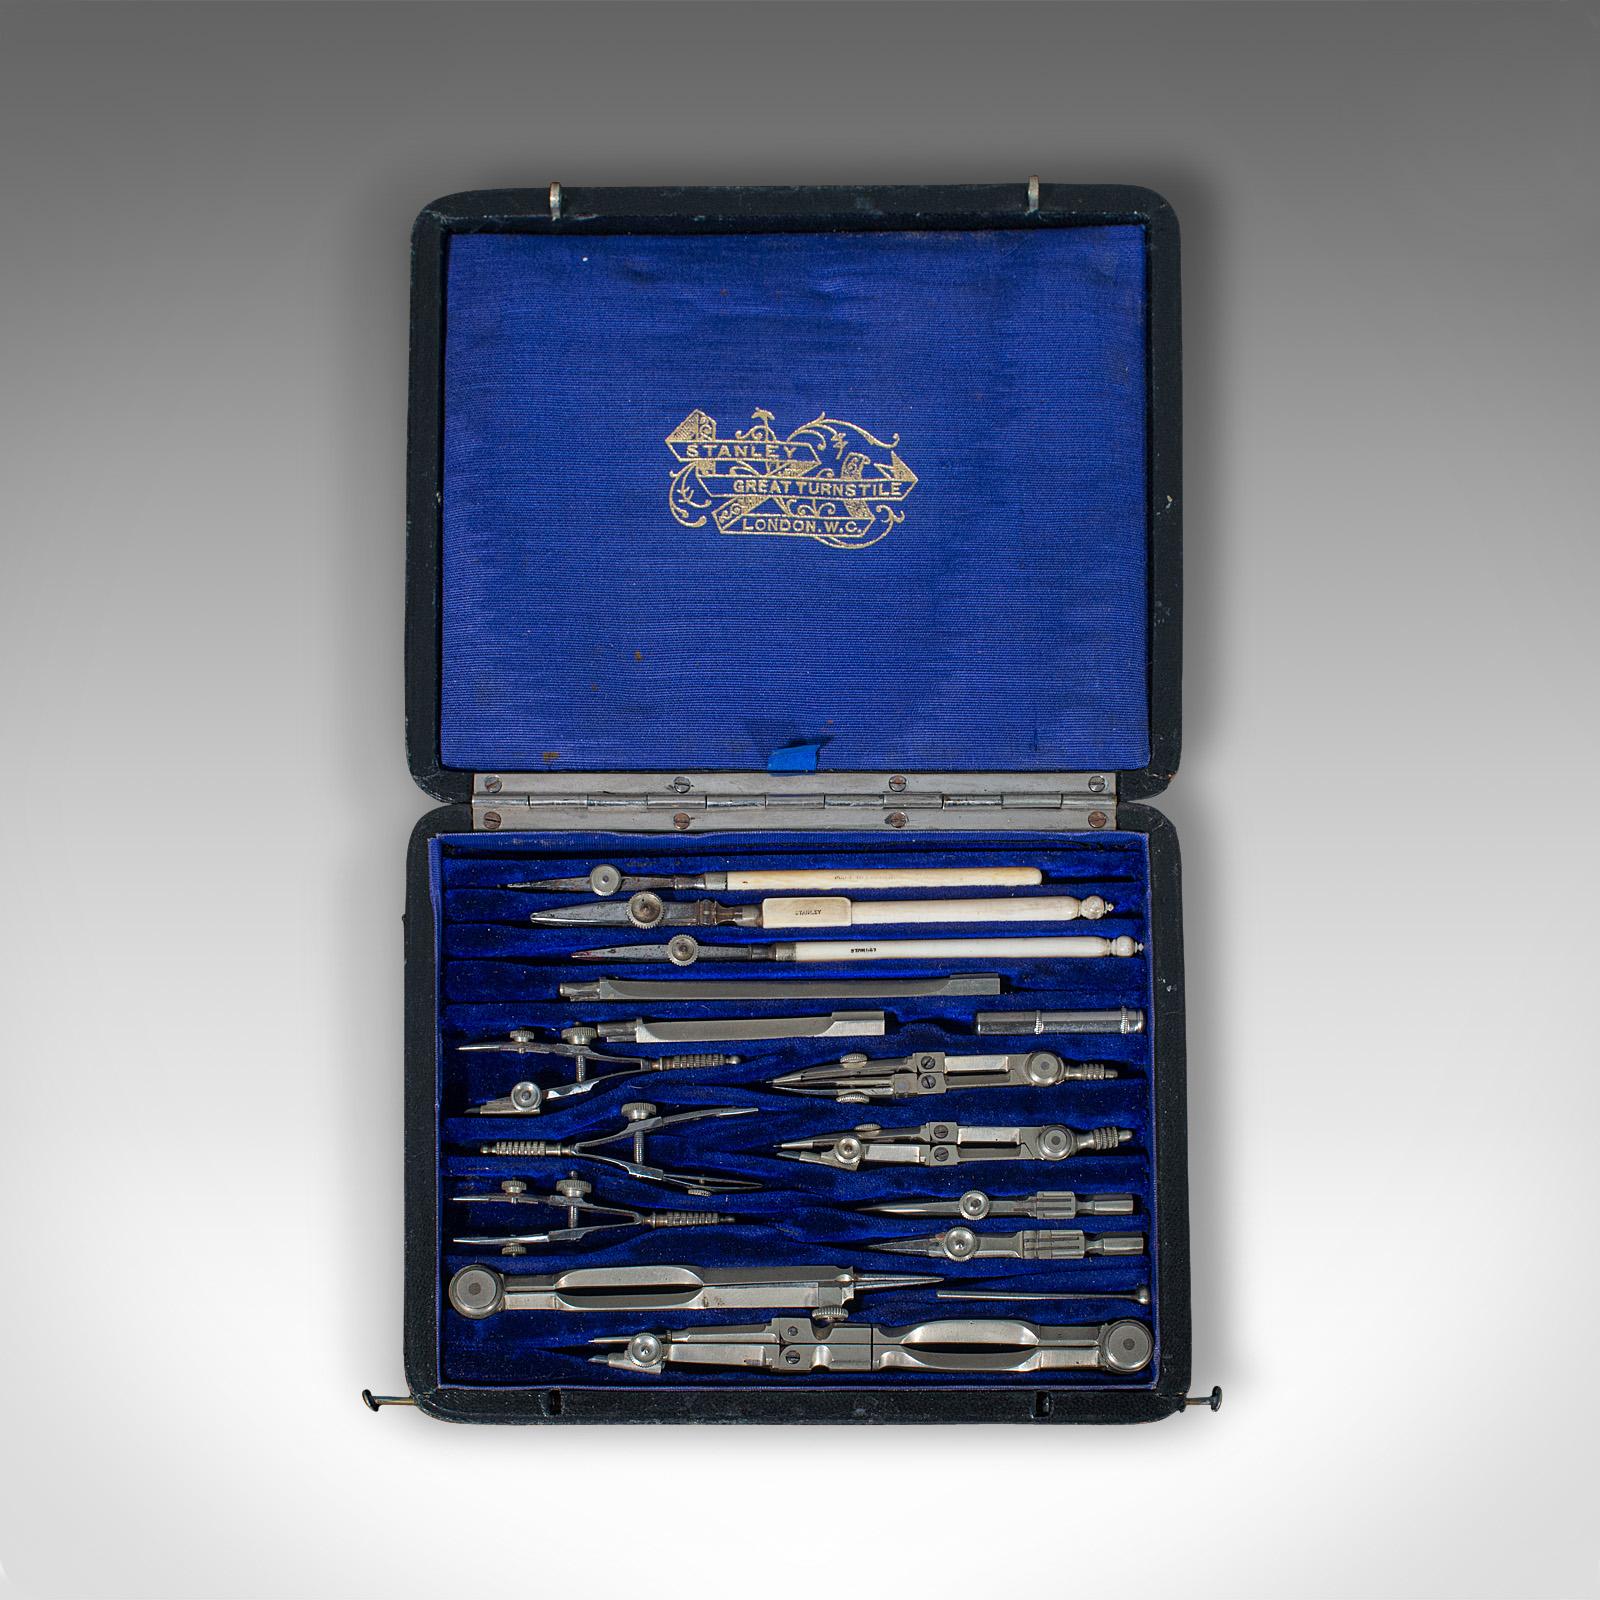 This is an antique cartographer's set. An English, silver nickel architect's or draughtsman's case by Stanley of London, dating to the Edwardian period, circa 1910.

Fascinating early 20th century instrument case
Displaying a desirable aged